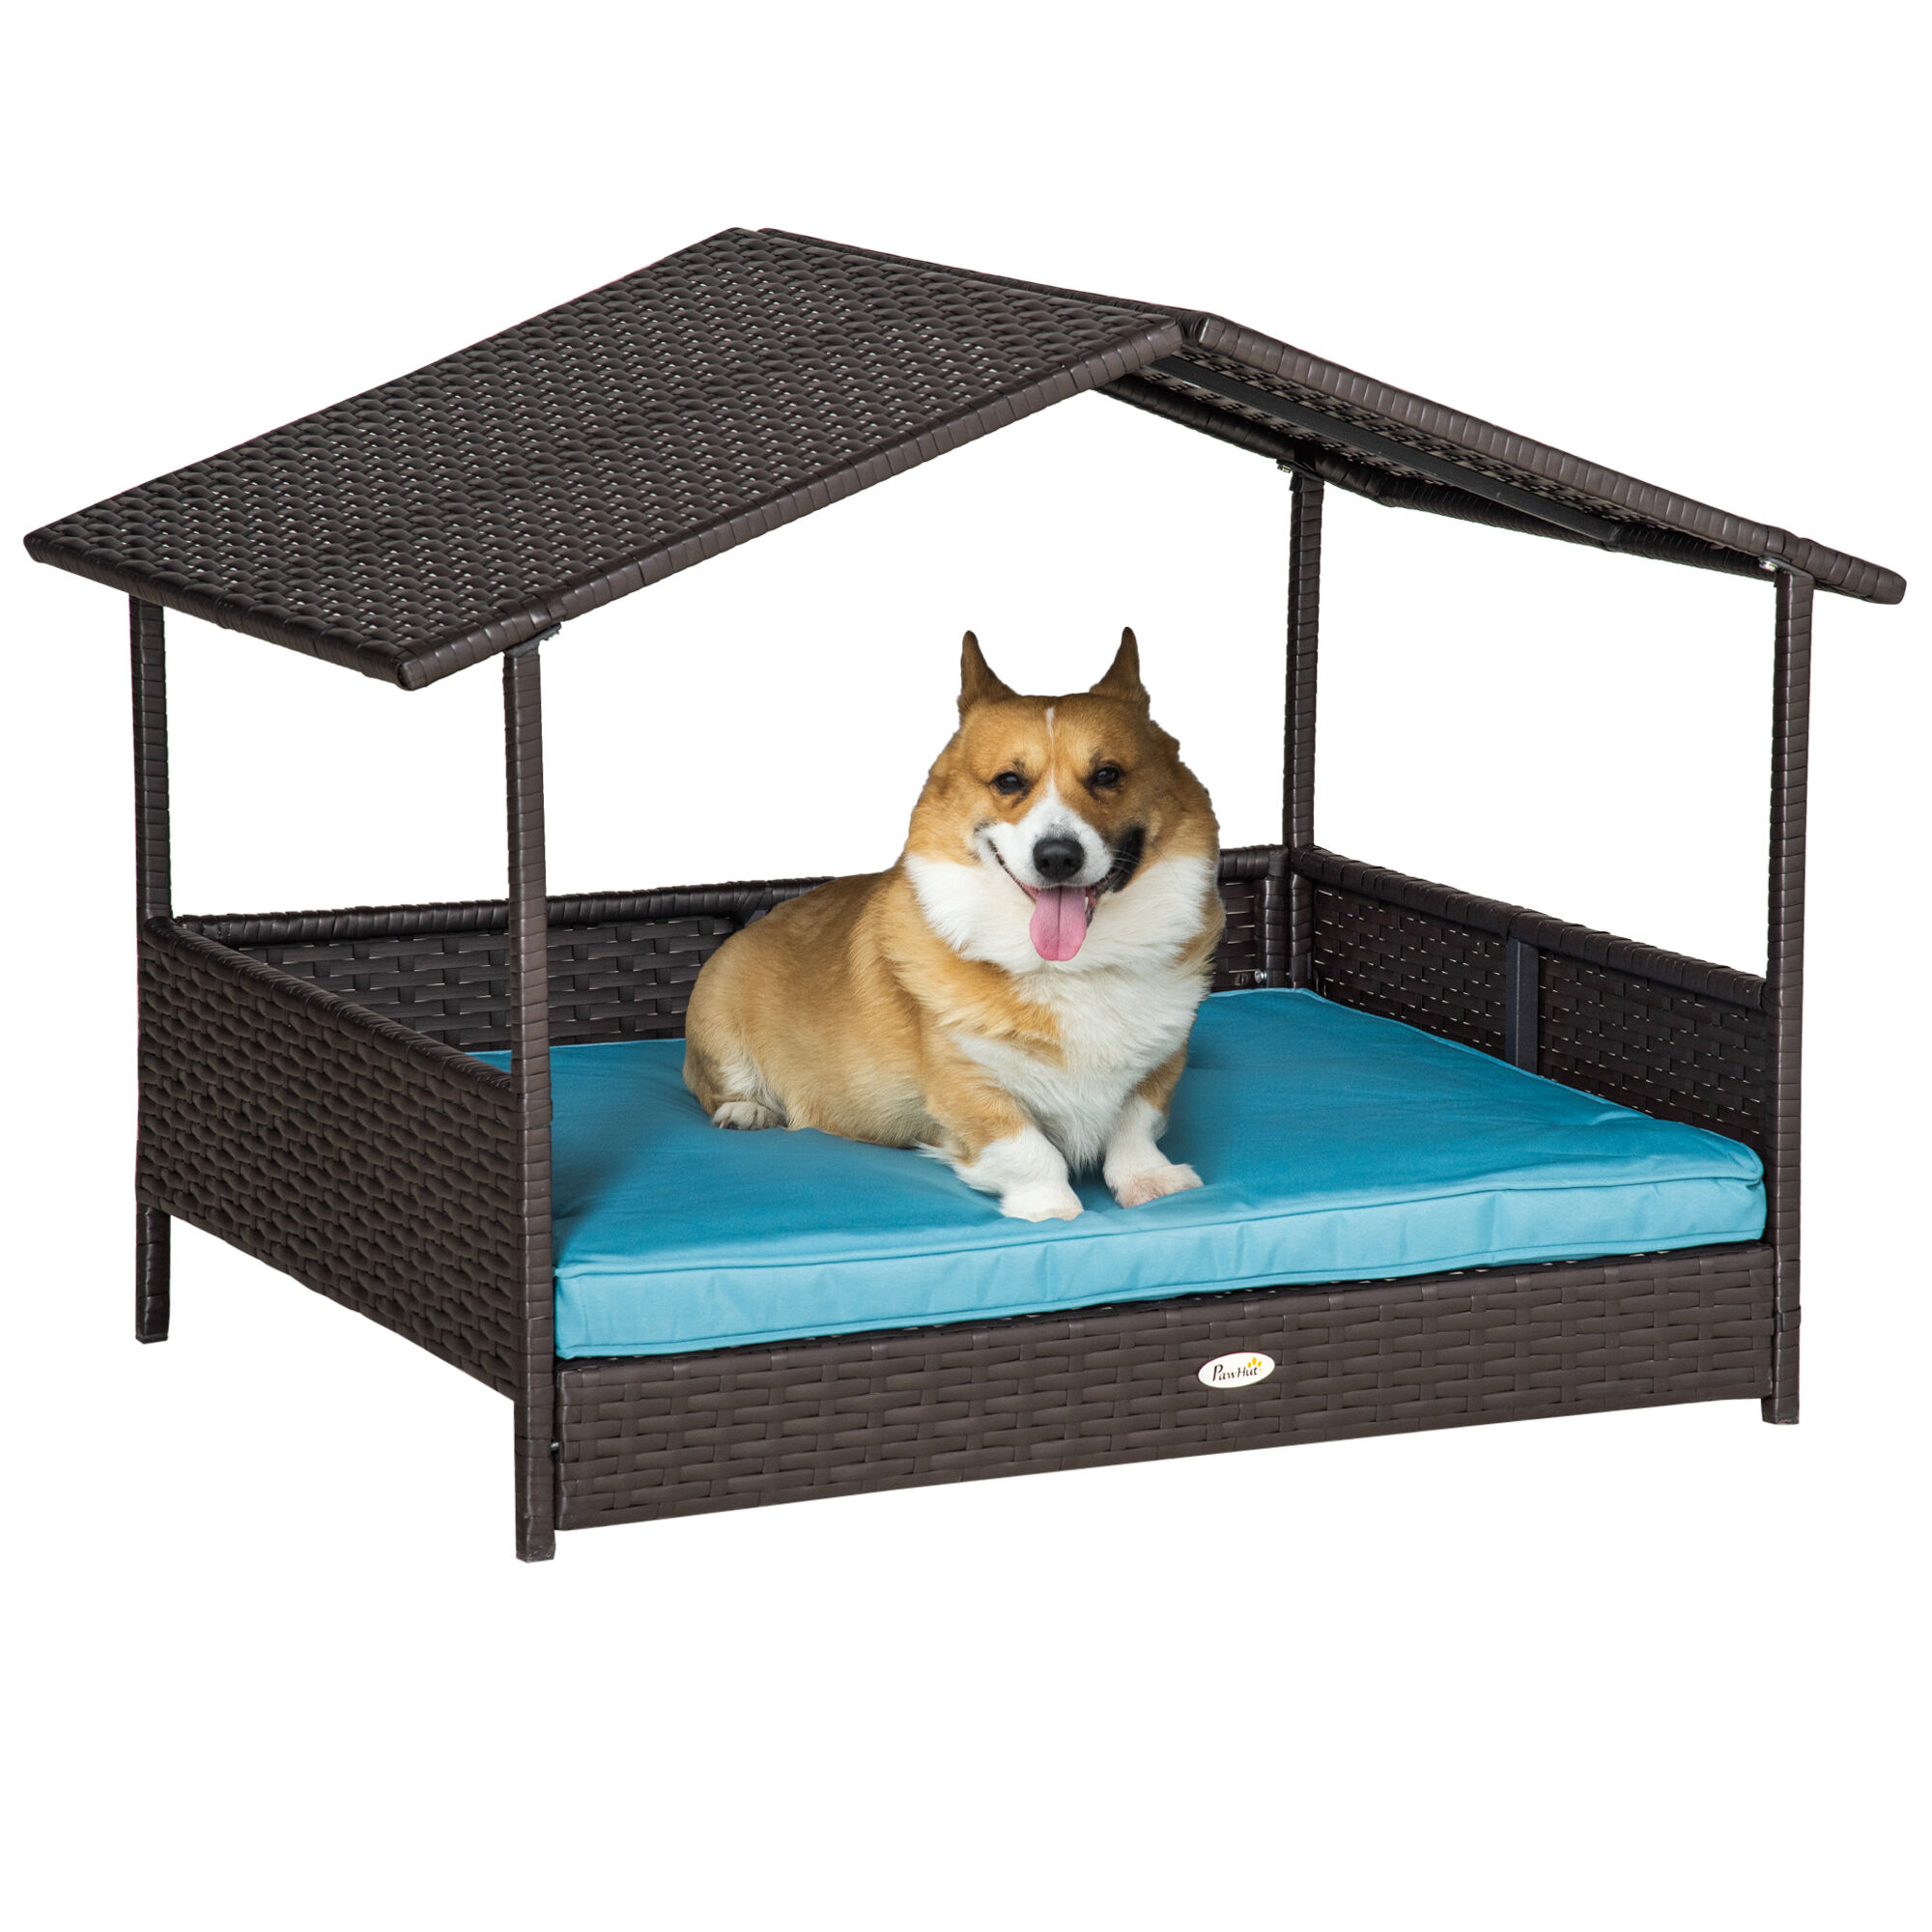 PawHut Elevated Wicker Dog House Indoor Outdoor Raised Rattan Bed Blue Removable Cushion   Aosom.com